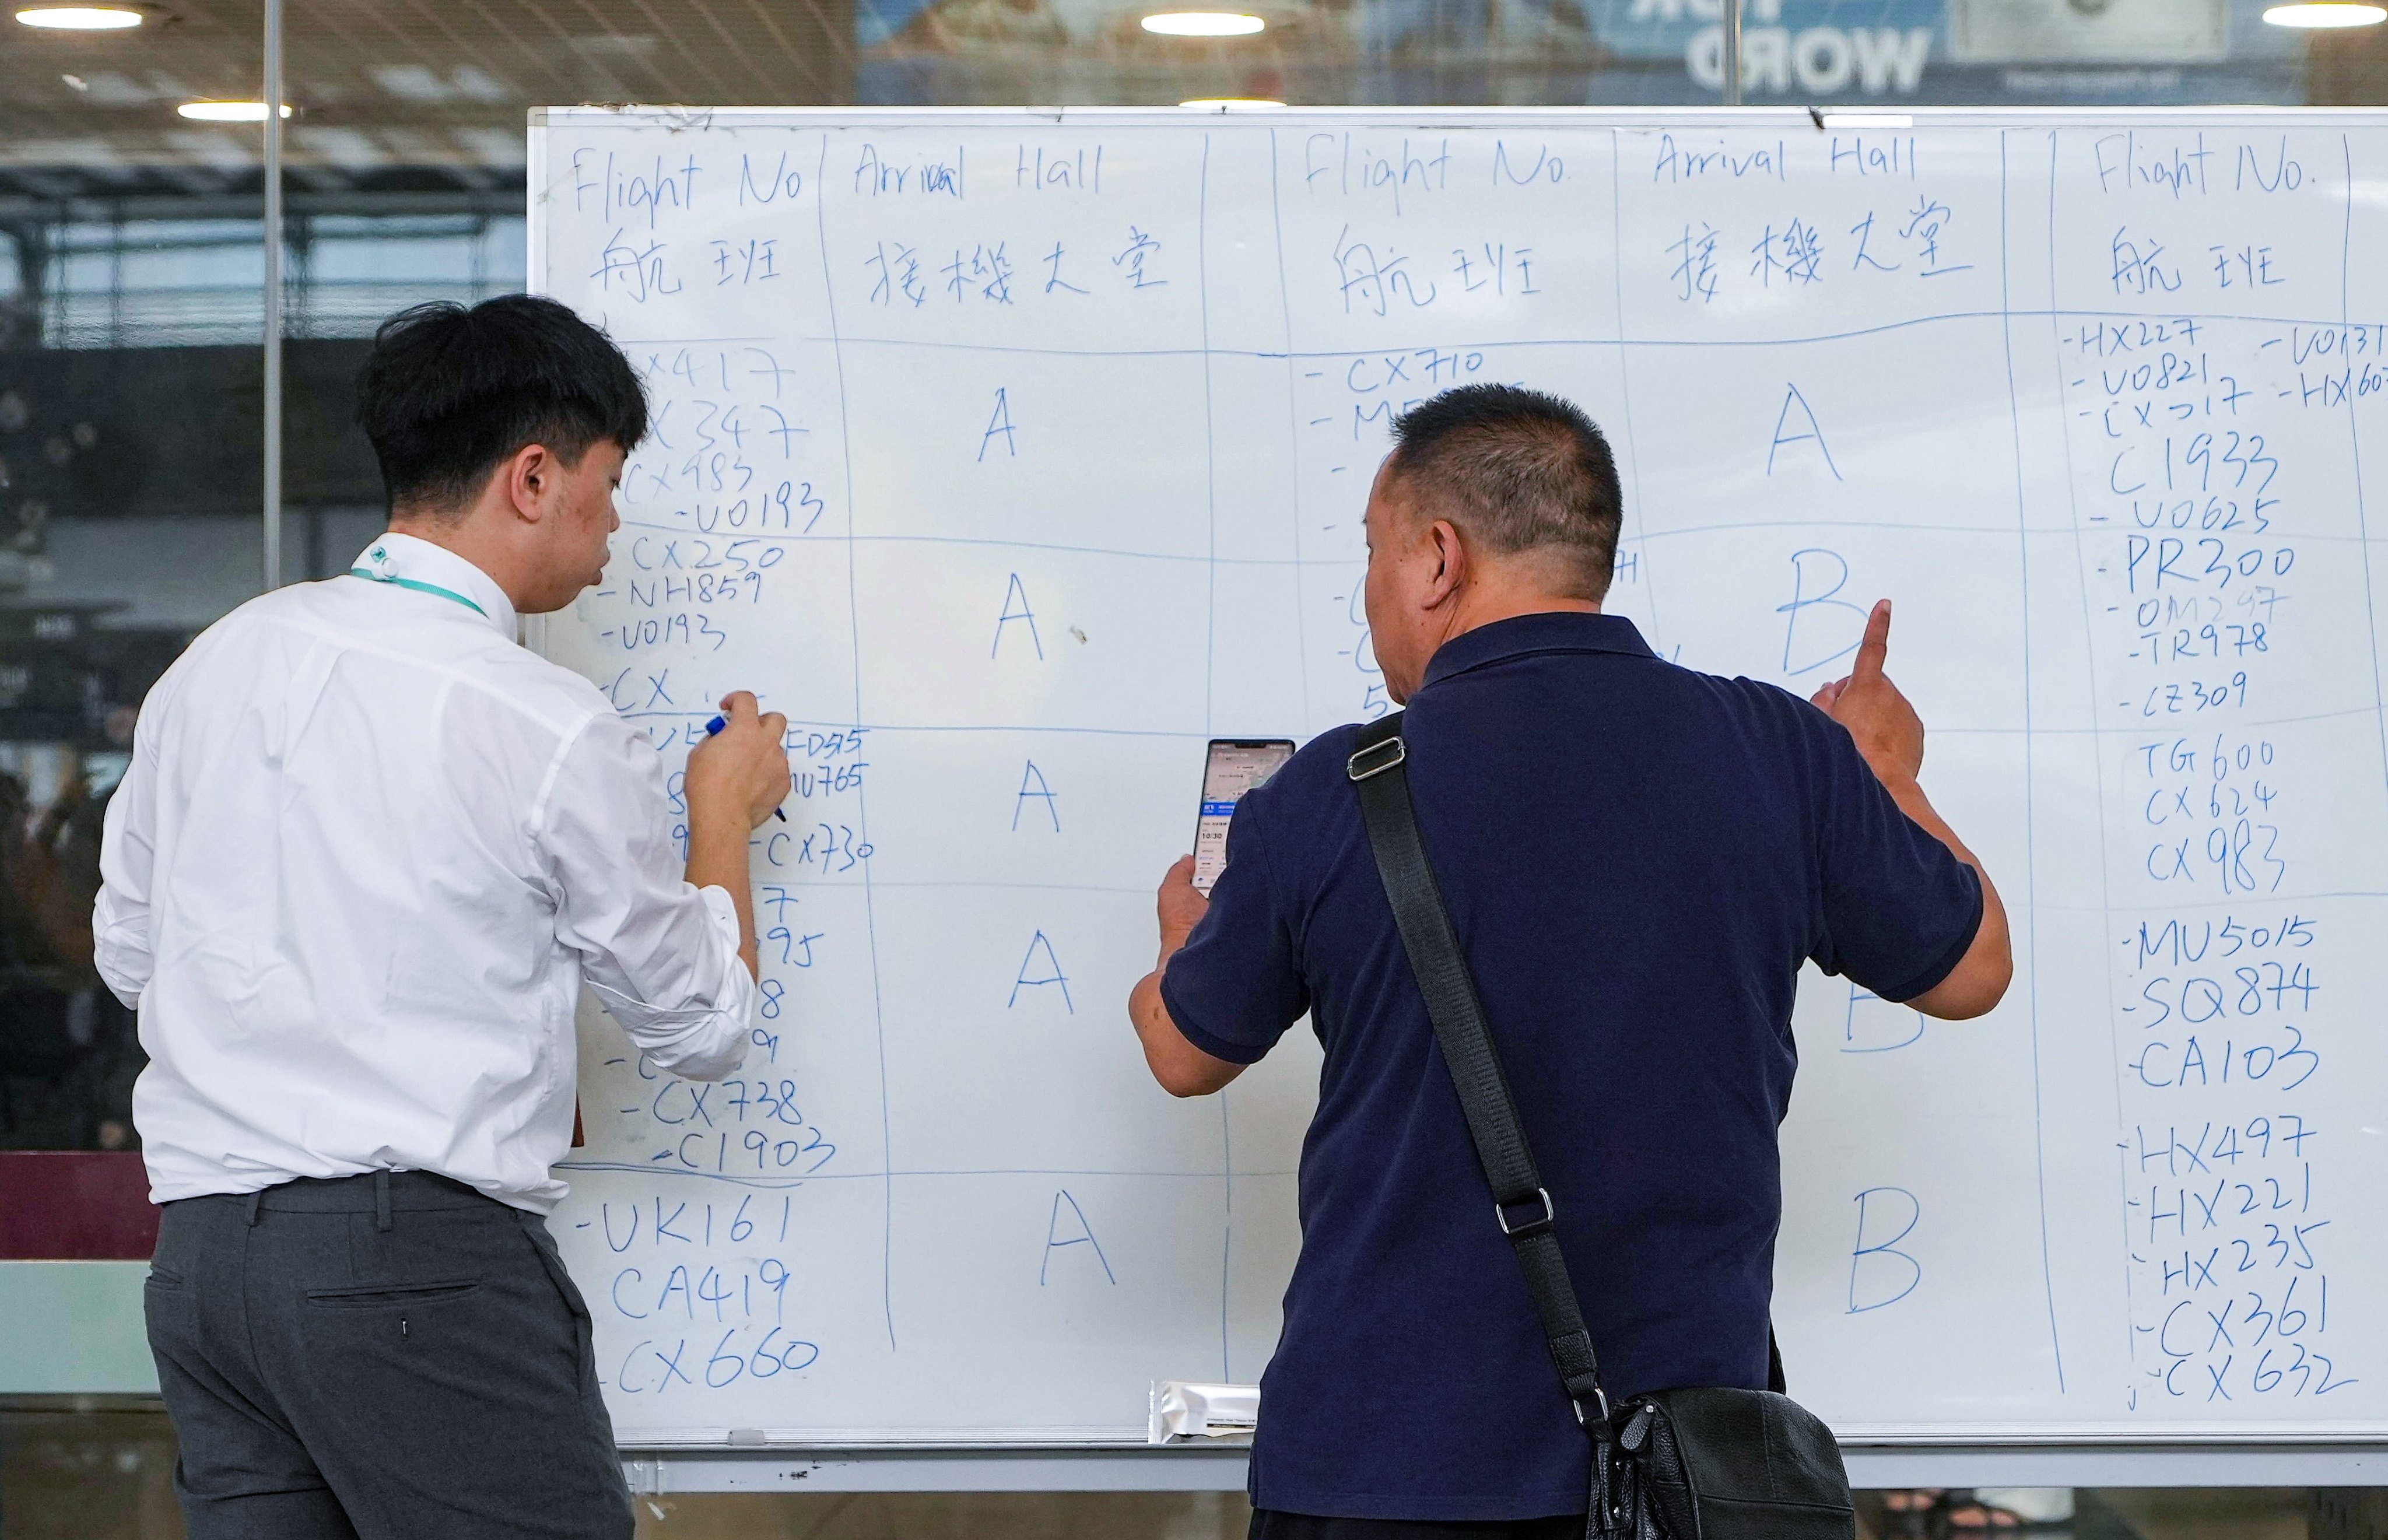 Airport staff write departure times and gate numbers on whiteboards with marker pens during the computer glitch on Sunday. Photo: Elson Li